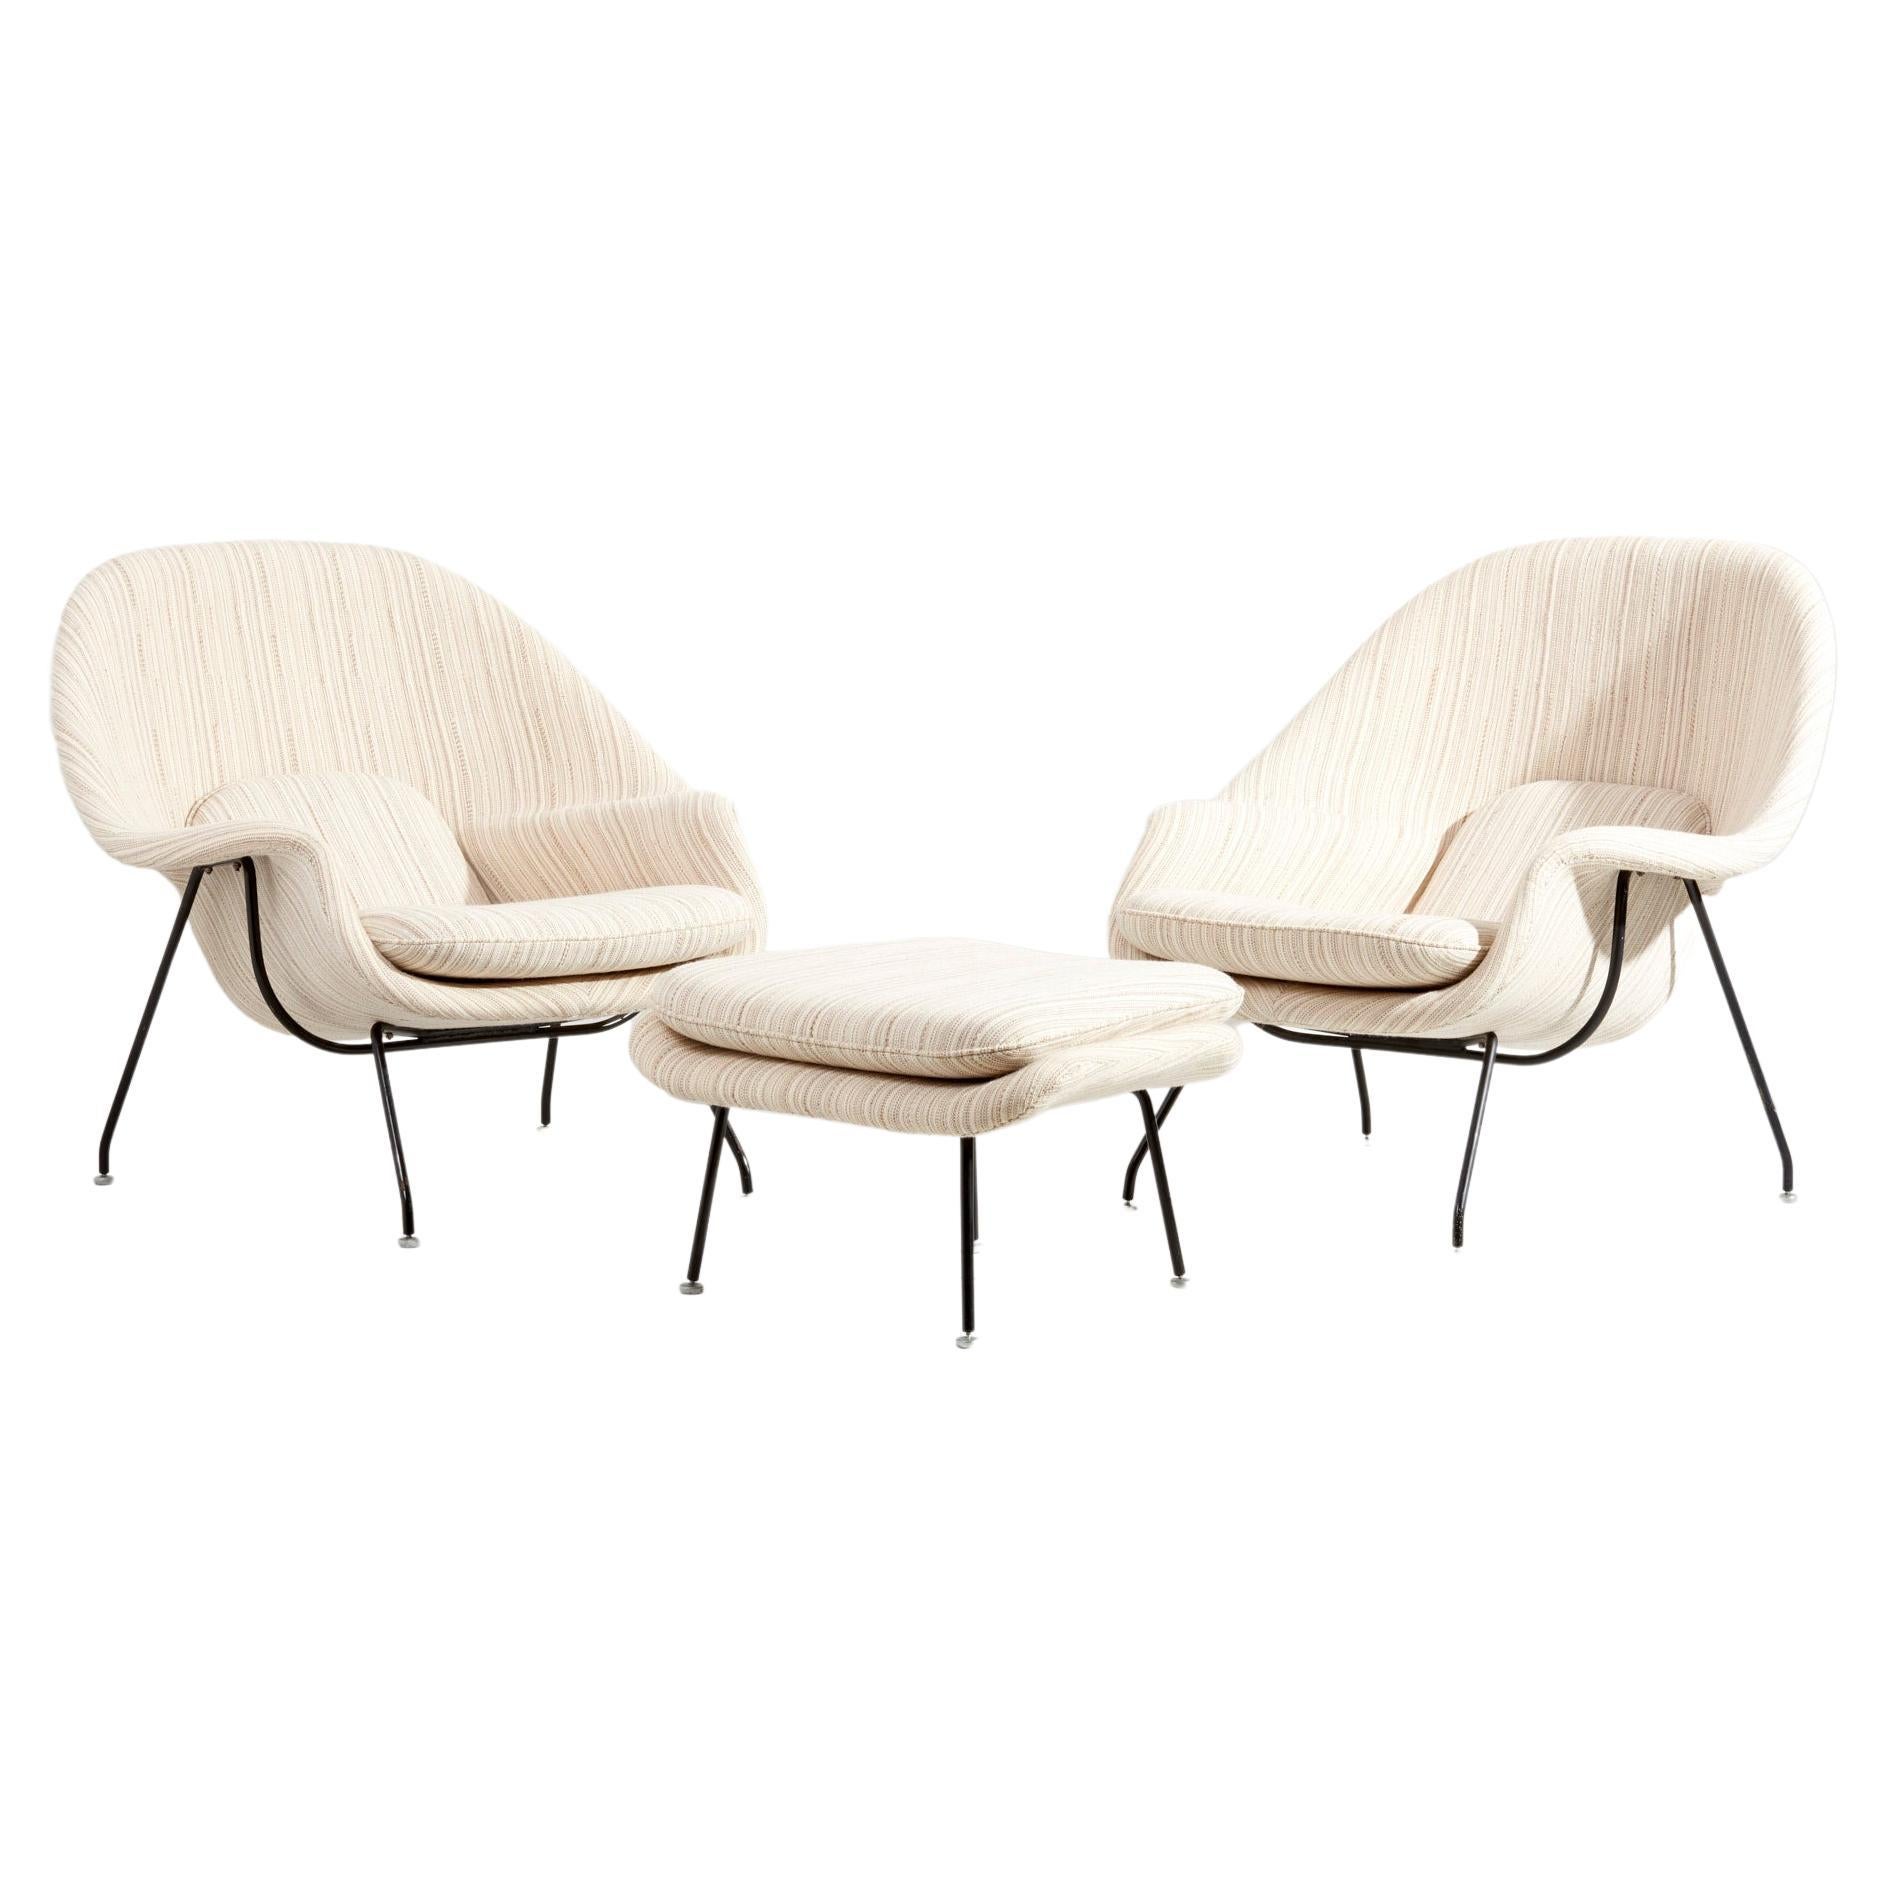 Set of Two beige Eero Saarinen Womb Chair and Ottoman for Knoll, USA, 1960s  For Sale